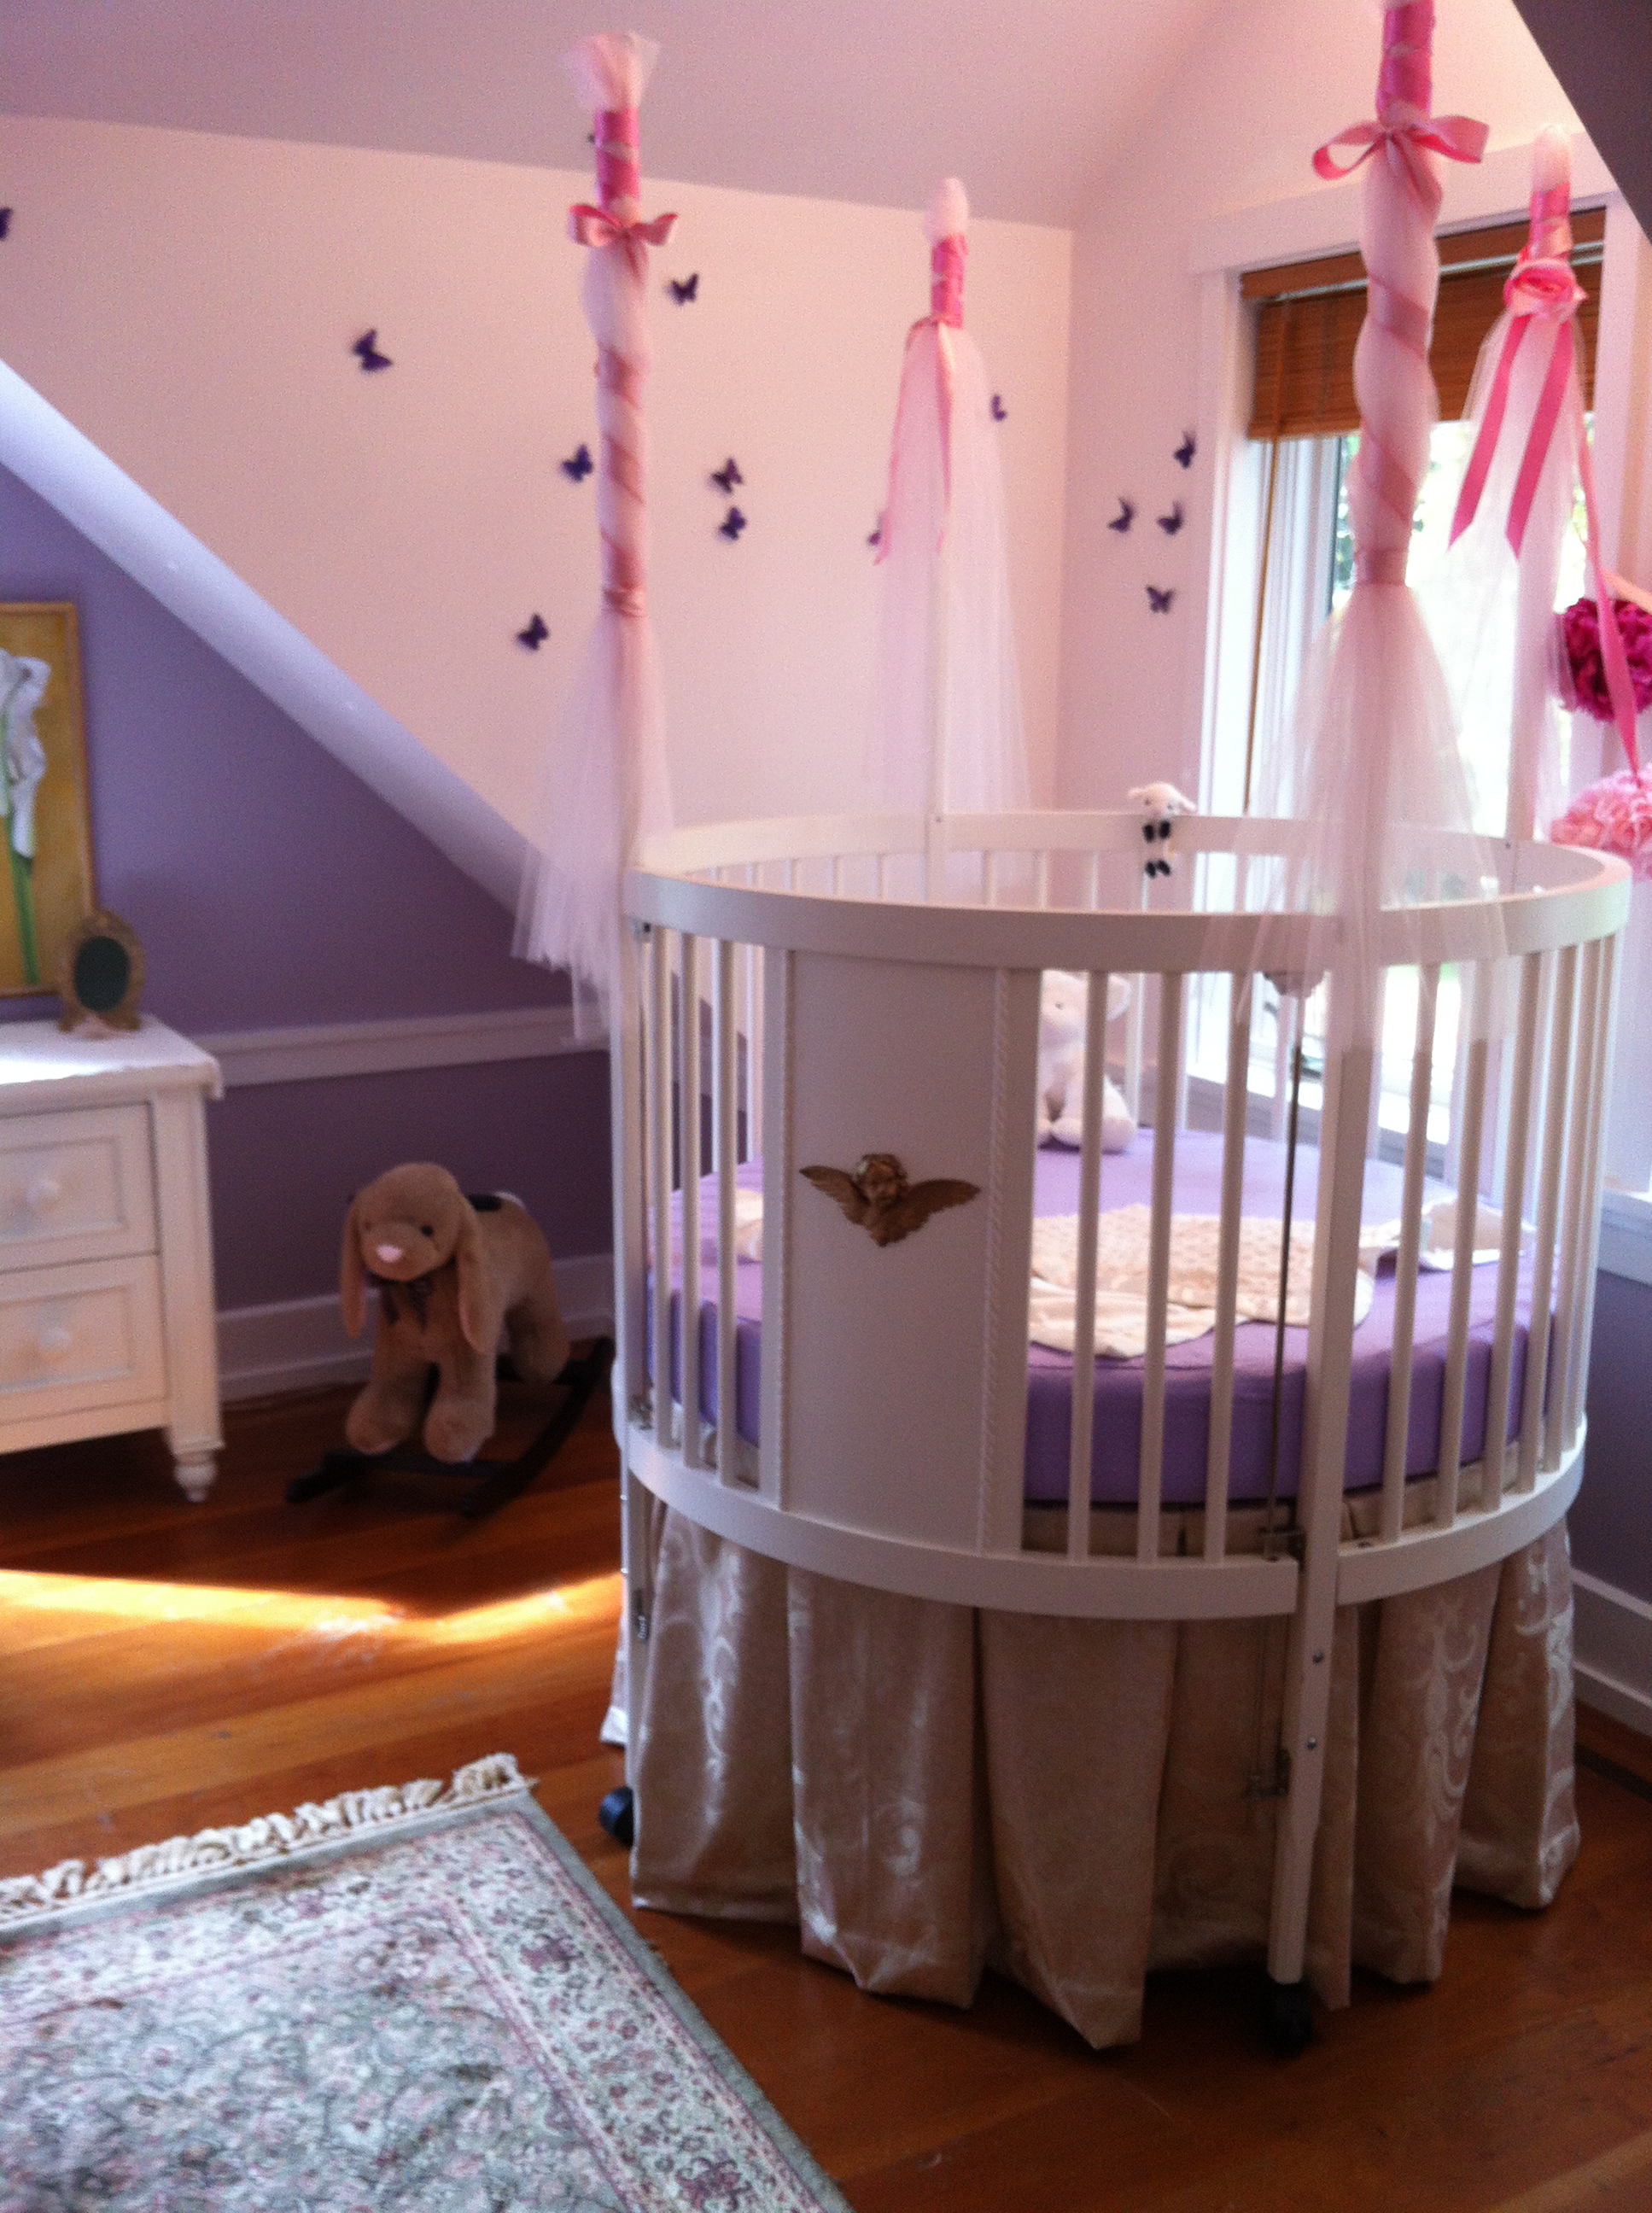 White Round Completed Cute White Round Crib Idea Completed With Purple Mattress And Metallic Skirt With Net And Pink Ribbon On Posts Kids Room Adorable Round Crib Decorated By Vintage Ornaments In Small Room